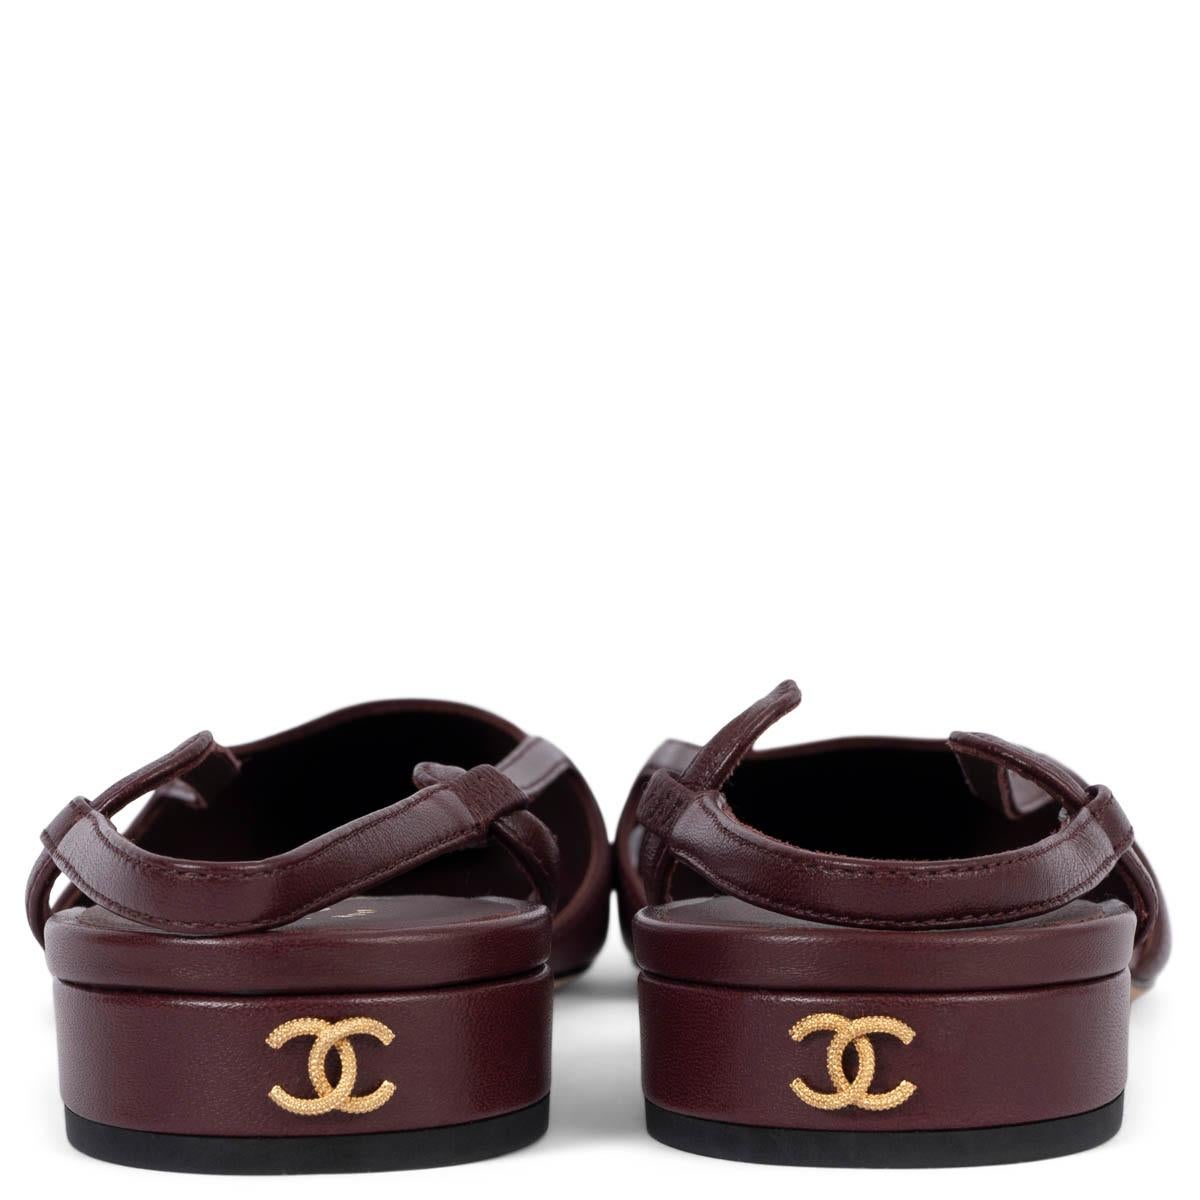 CHANEL burgundy leather G35261 SLINGBACK Flats Shoes 39 fit 38.5 1